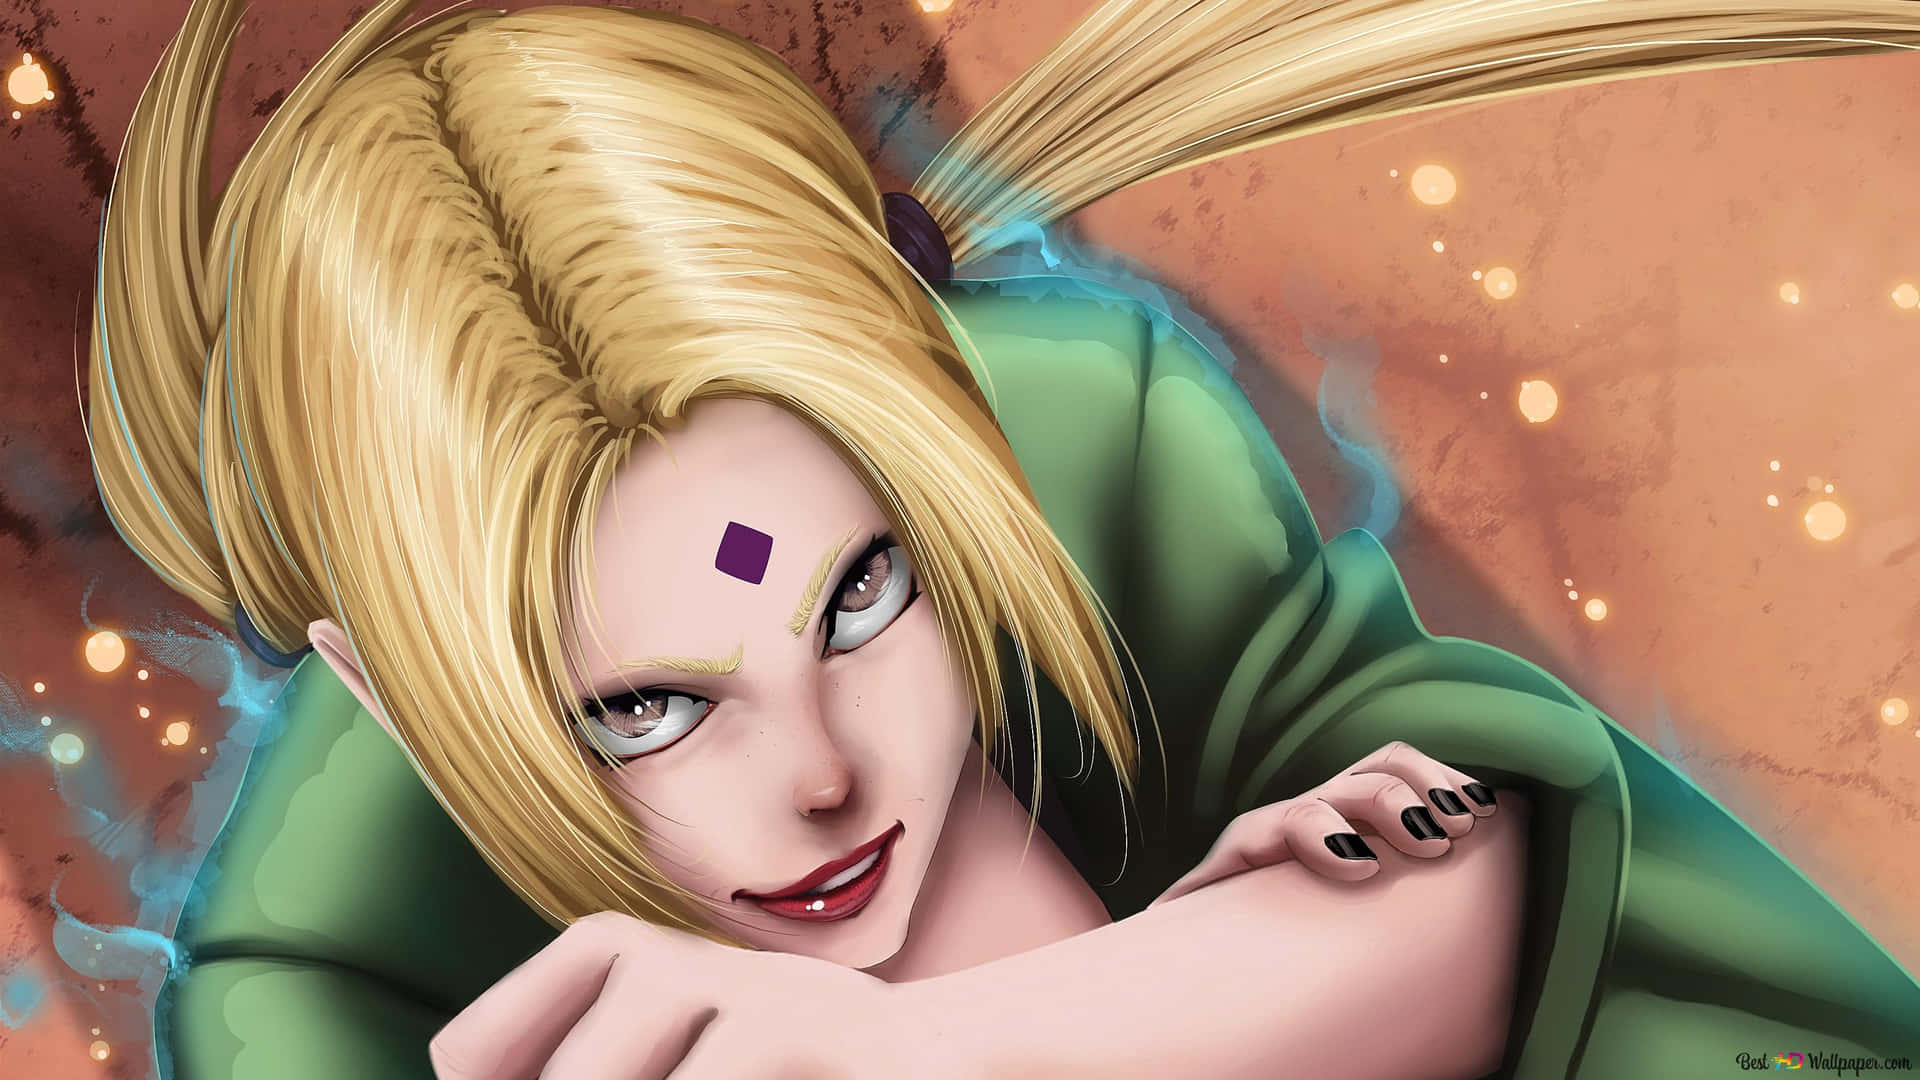 Customize Your Iphone X With This Tsunade Themed Design Wallpaper